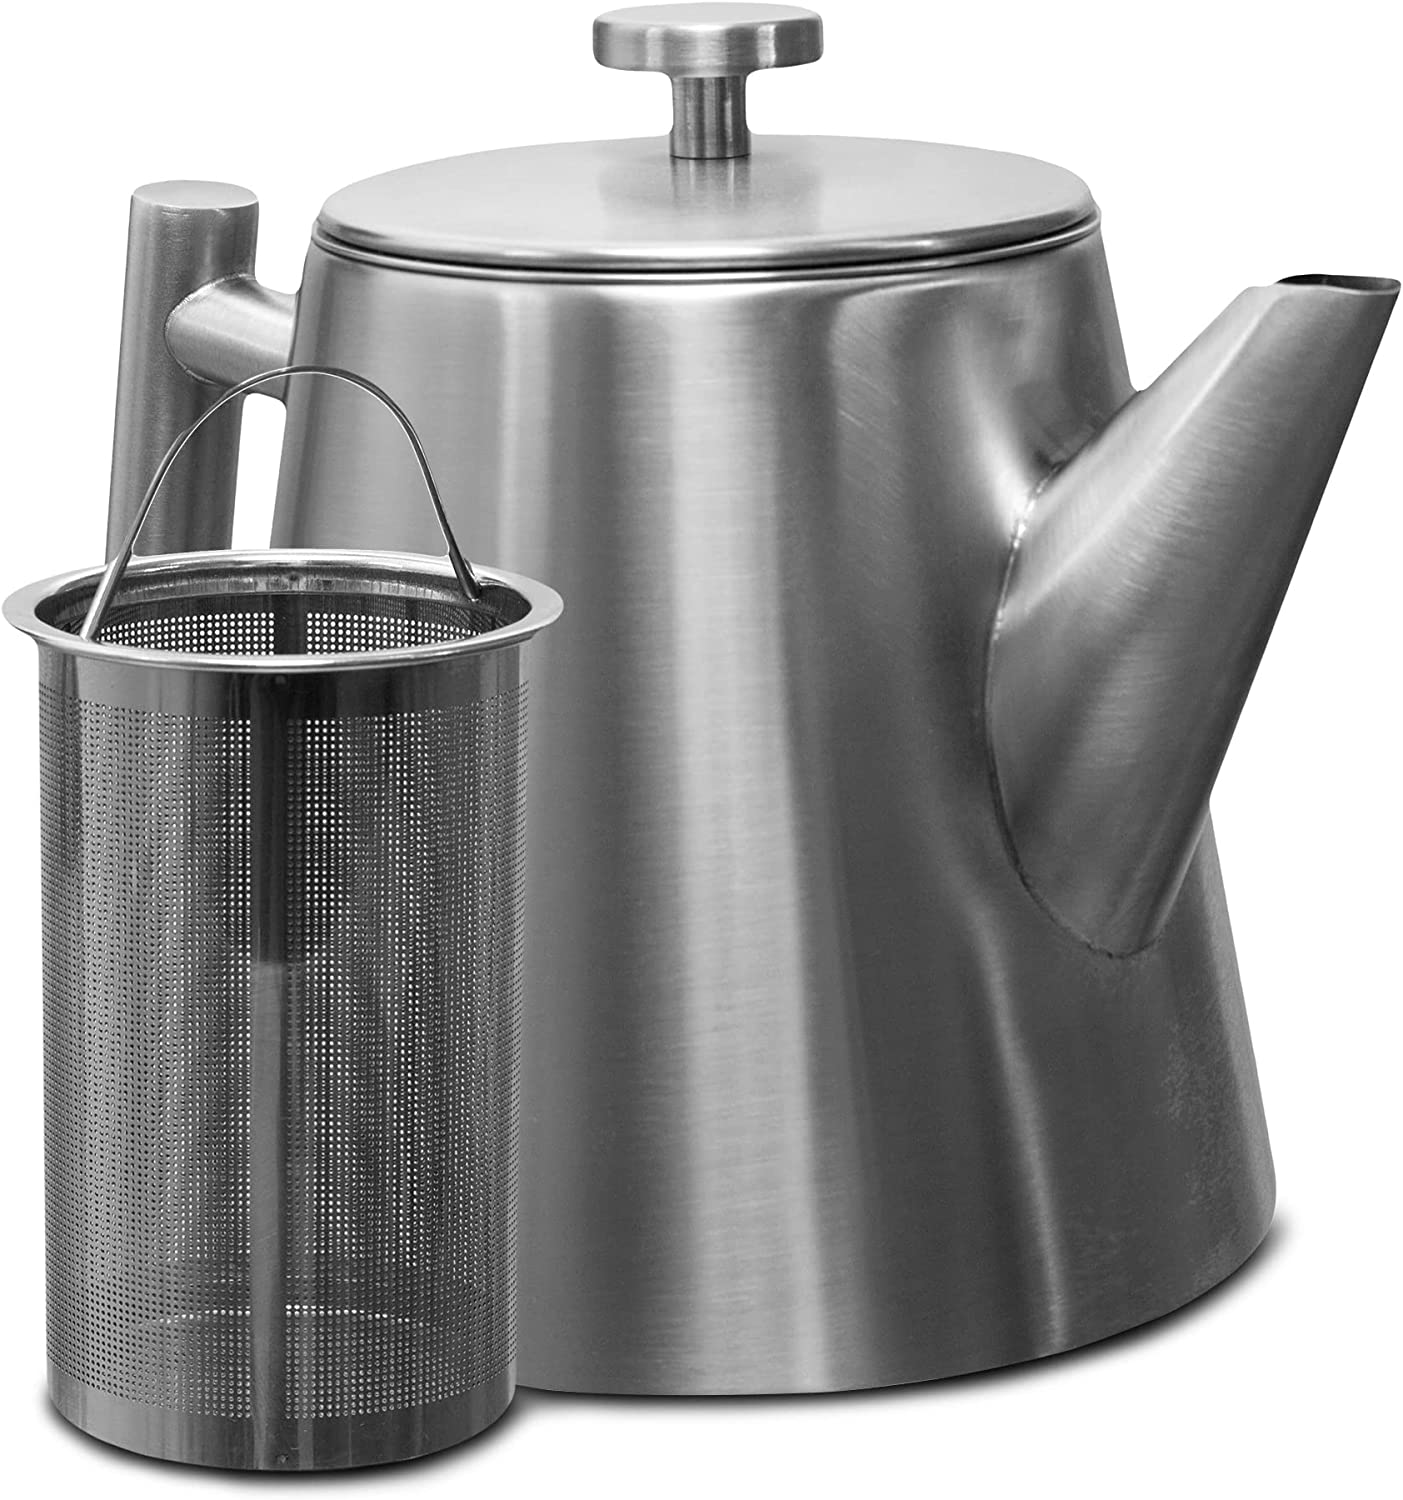 Vaja Trends | Teapot | Gray Stainless Steel 1l | Teapot with Strainer Insert | Stainless Steel Teapot Warmer for Teapot | Teapot with warm | Tea Maker | Double-Walled